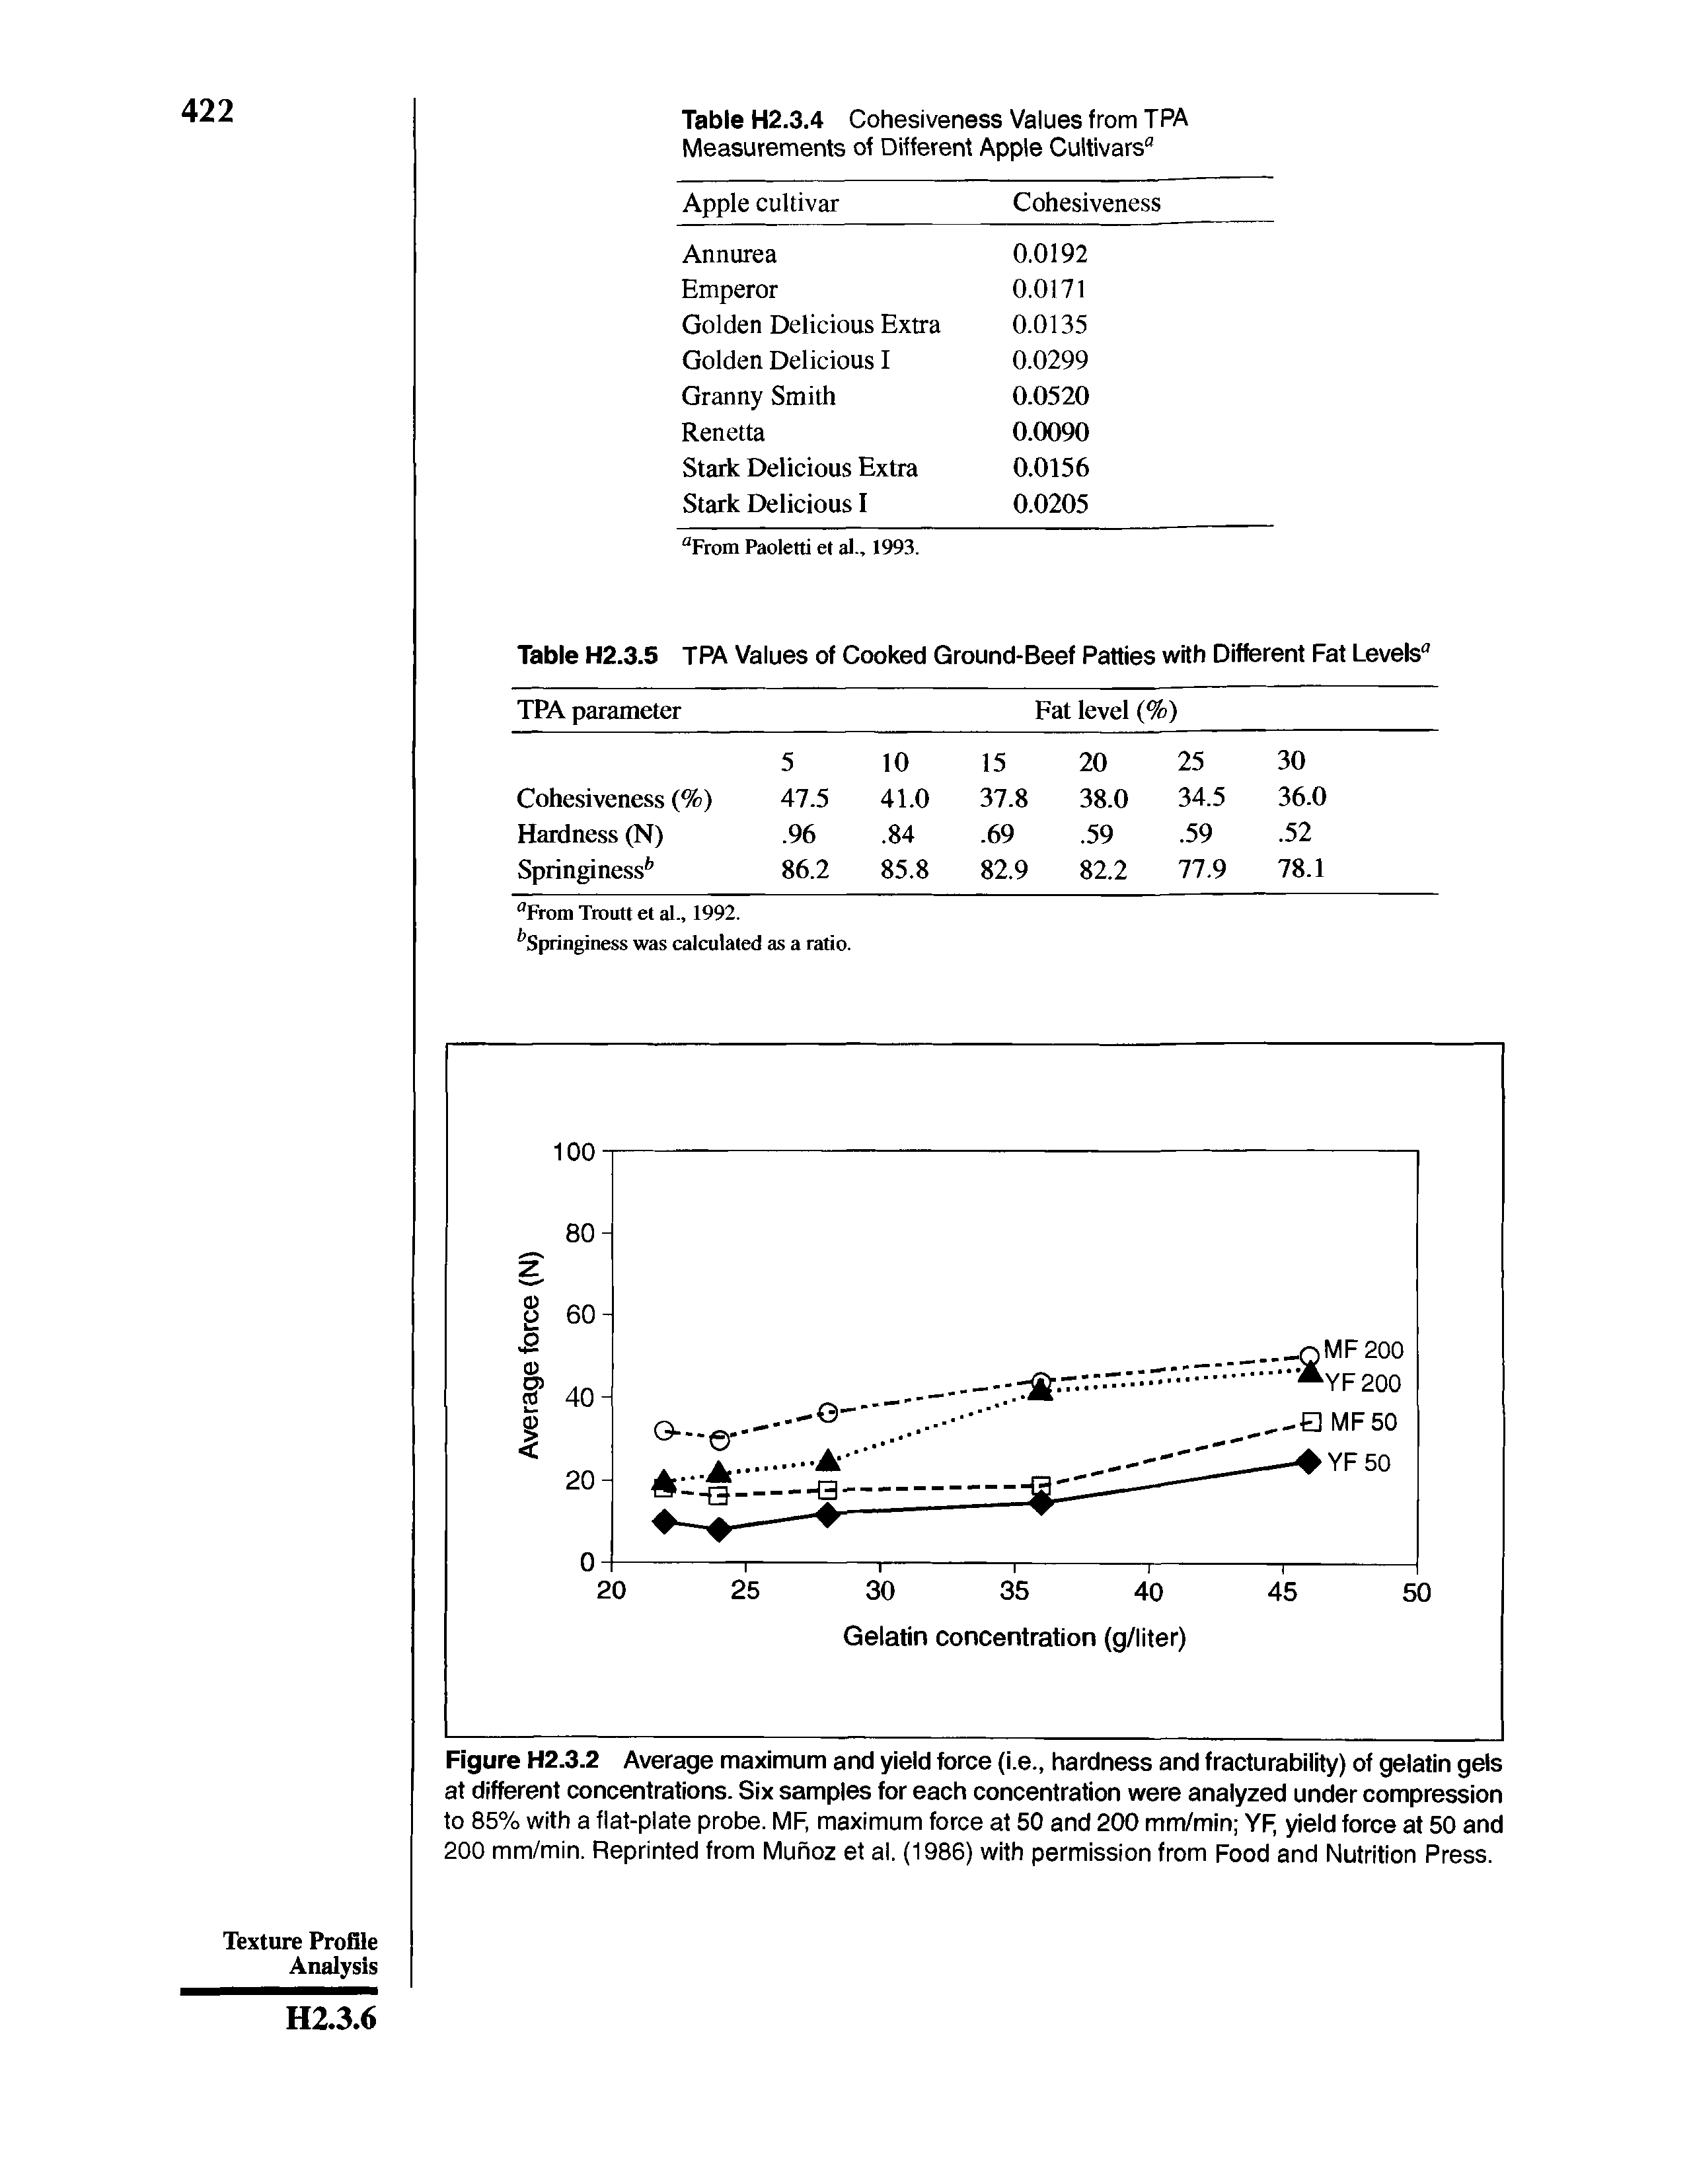 Figure H2.3.2 Average maximum and yield force (i.e., hardness and fracturability) of gelatin gels at different concentrations. Six samples for each concentration were analyzed under compression to 85% with a flat-plate probe. MF, maximum force at 50 and 200 mm/min YE yield force at 50 and 200 mm/min. Reprinted from Munoz et al. (1986) with permission from Food and Nutrition Press.